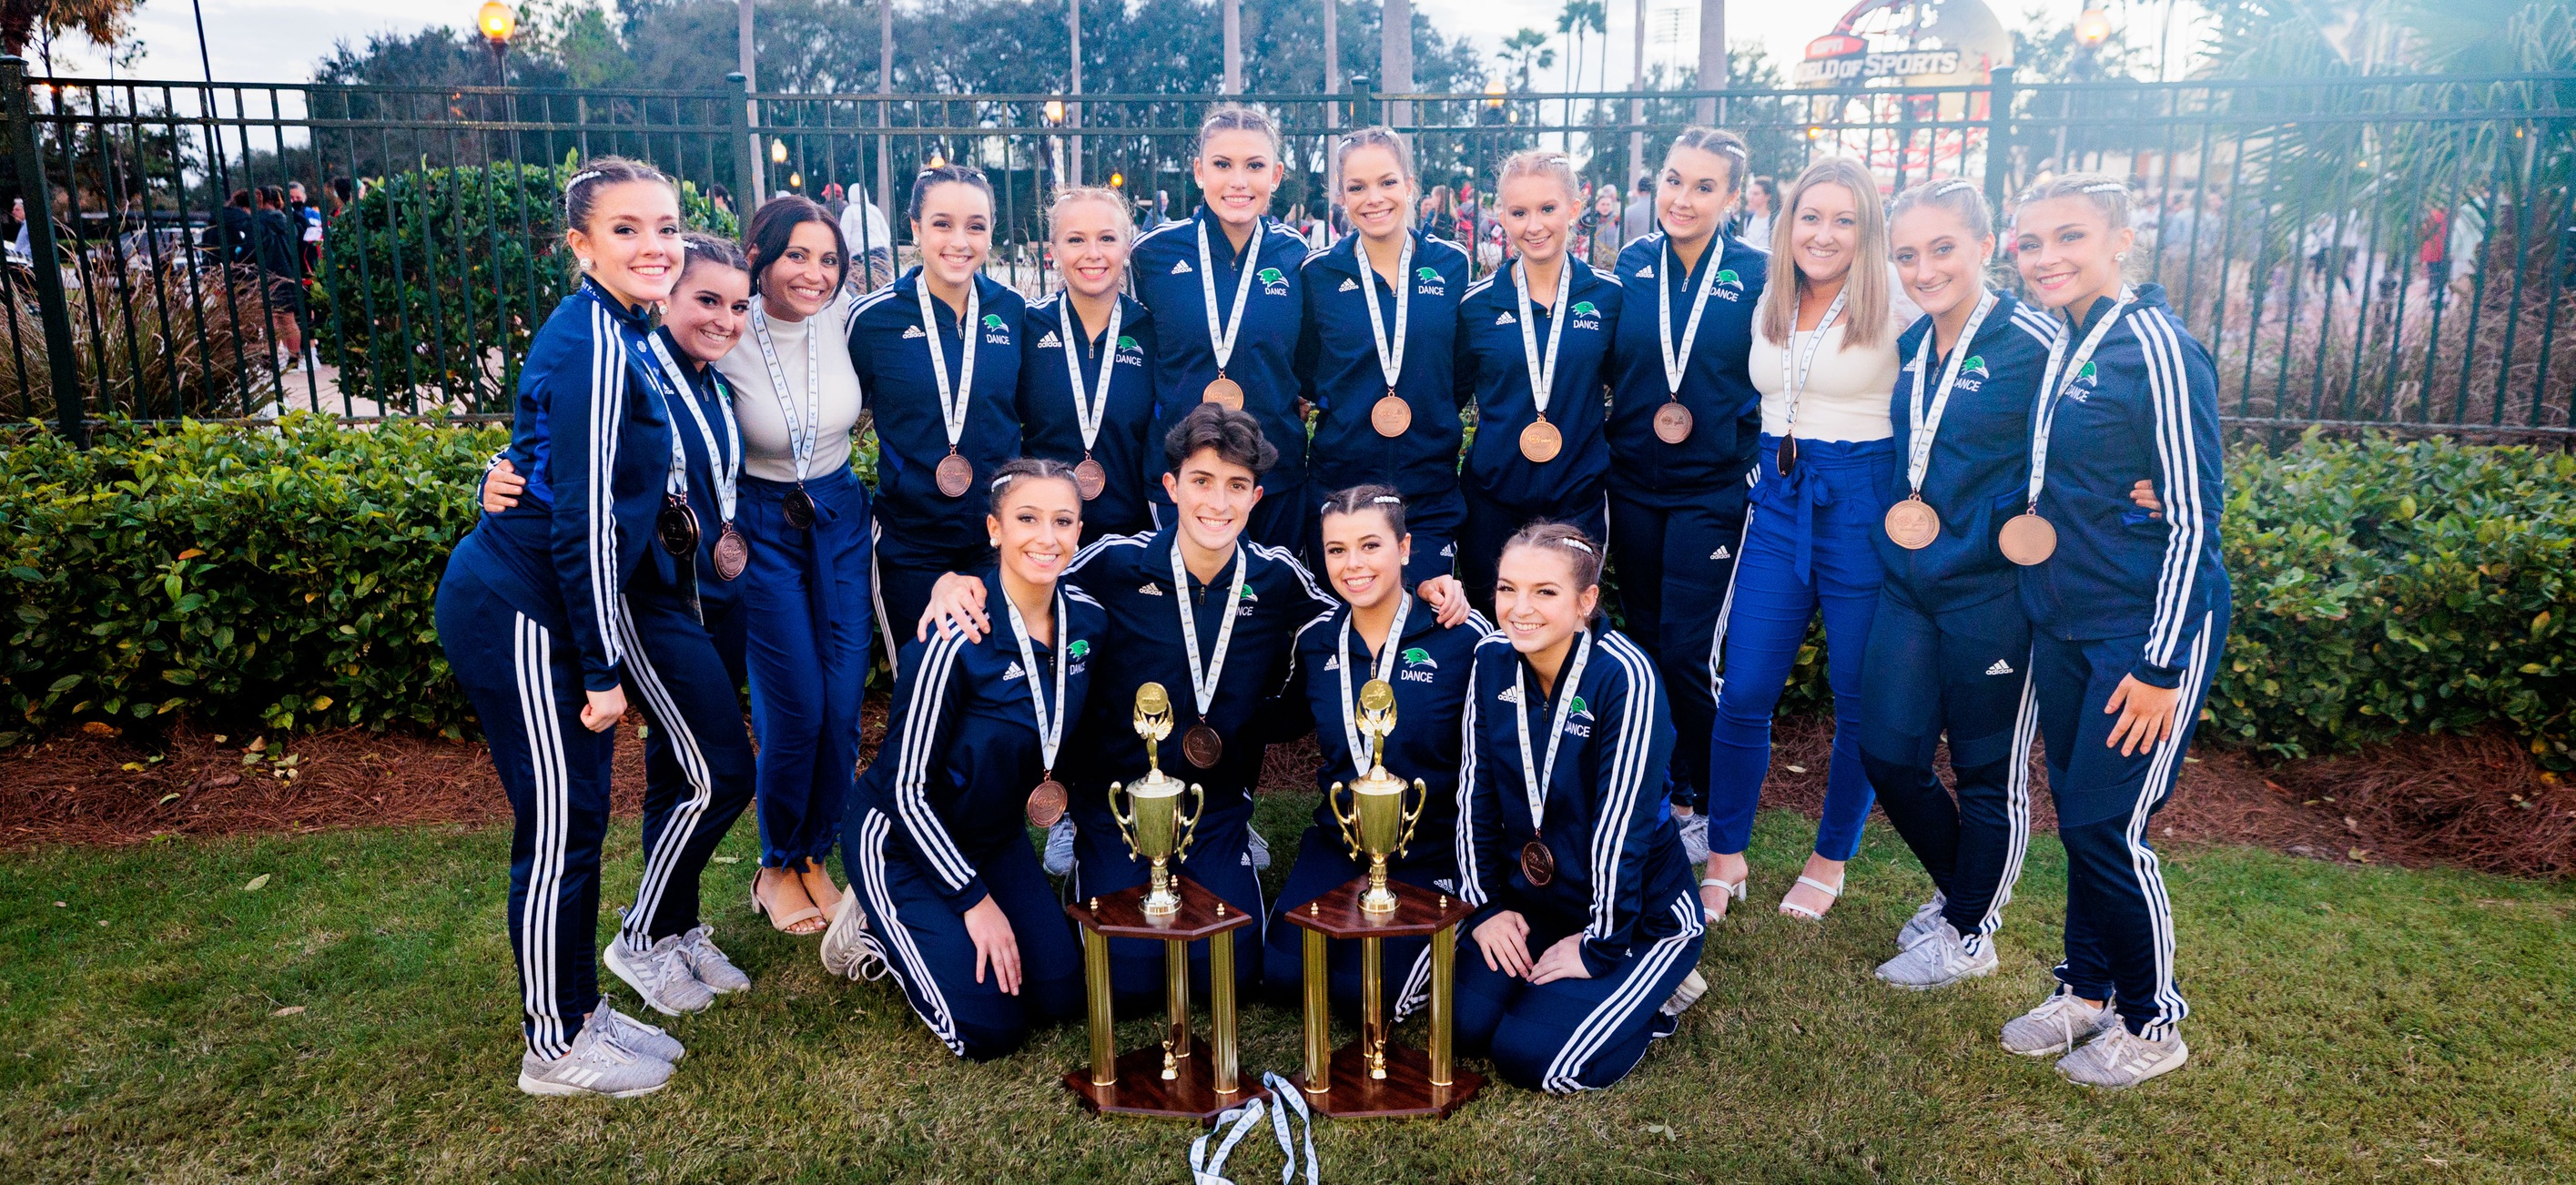 Dance Shines Once Again At Nationals